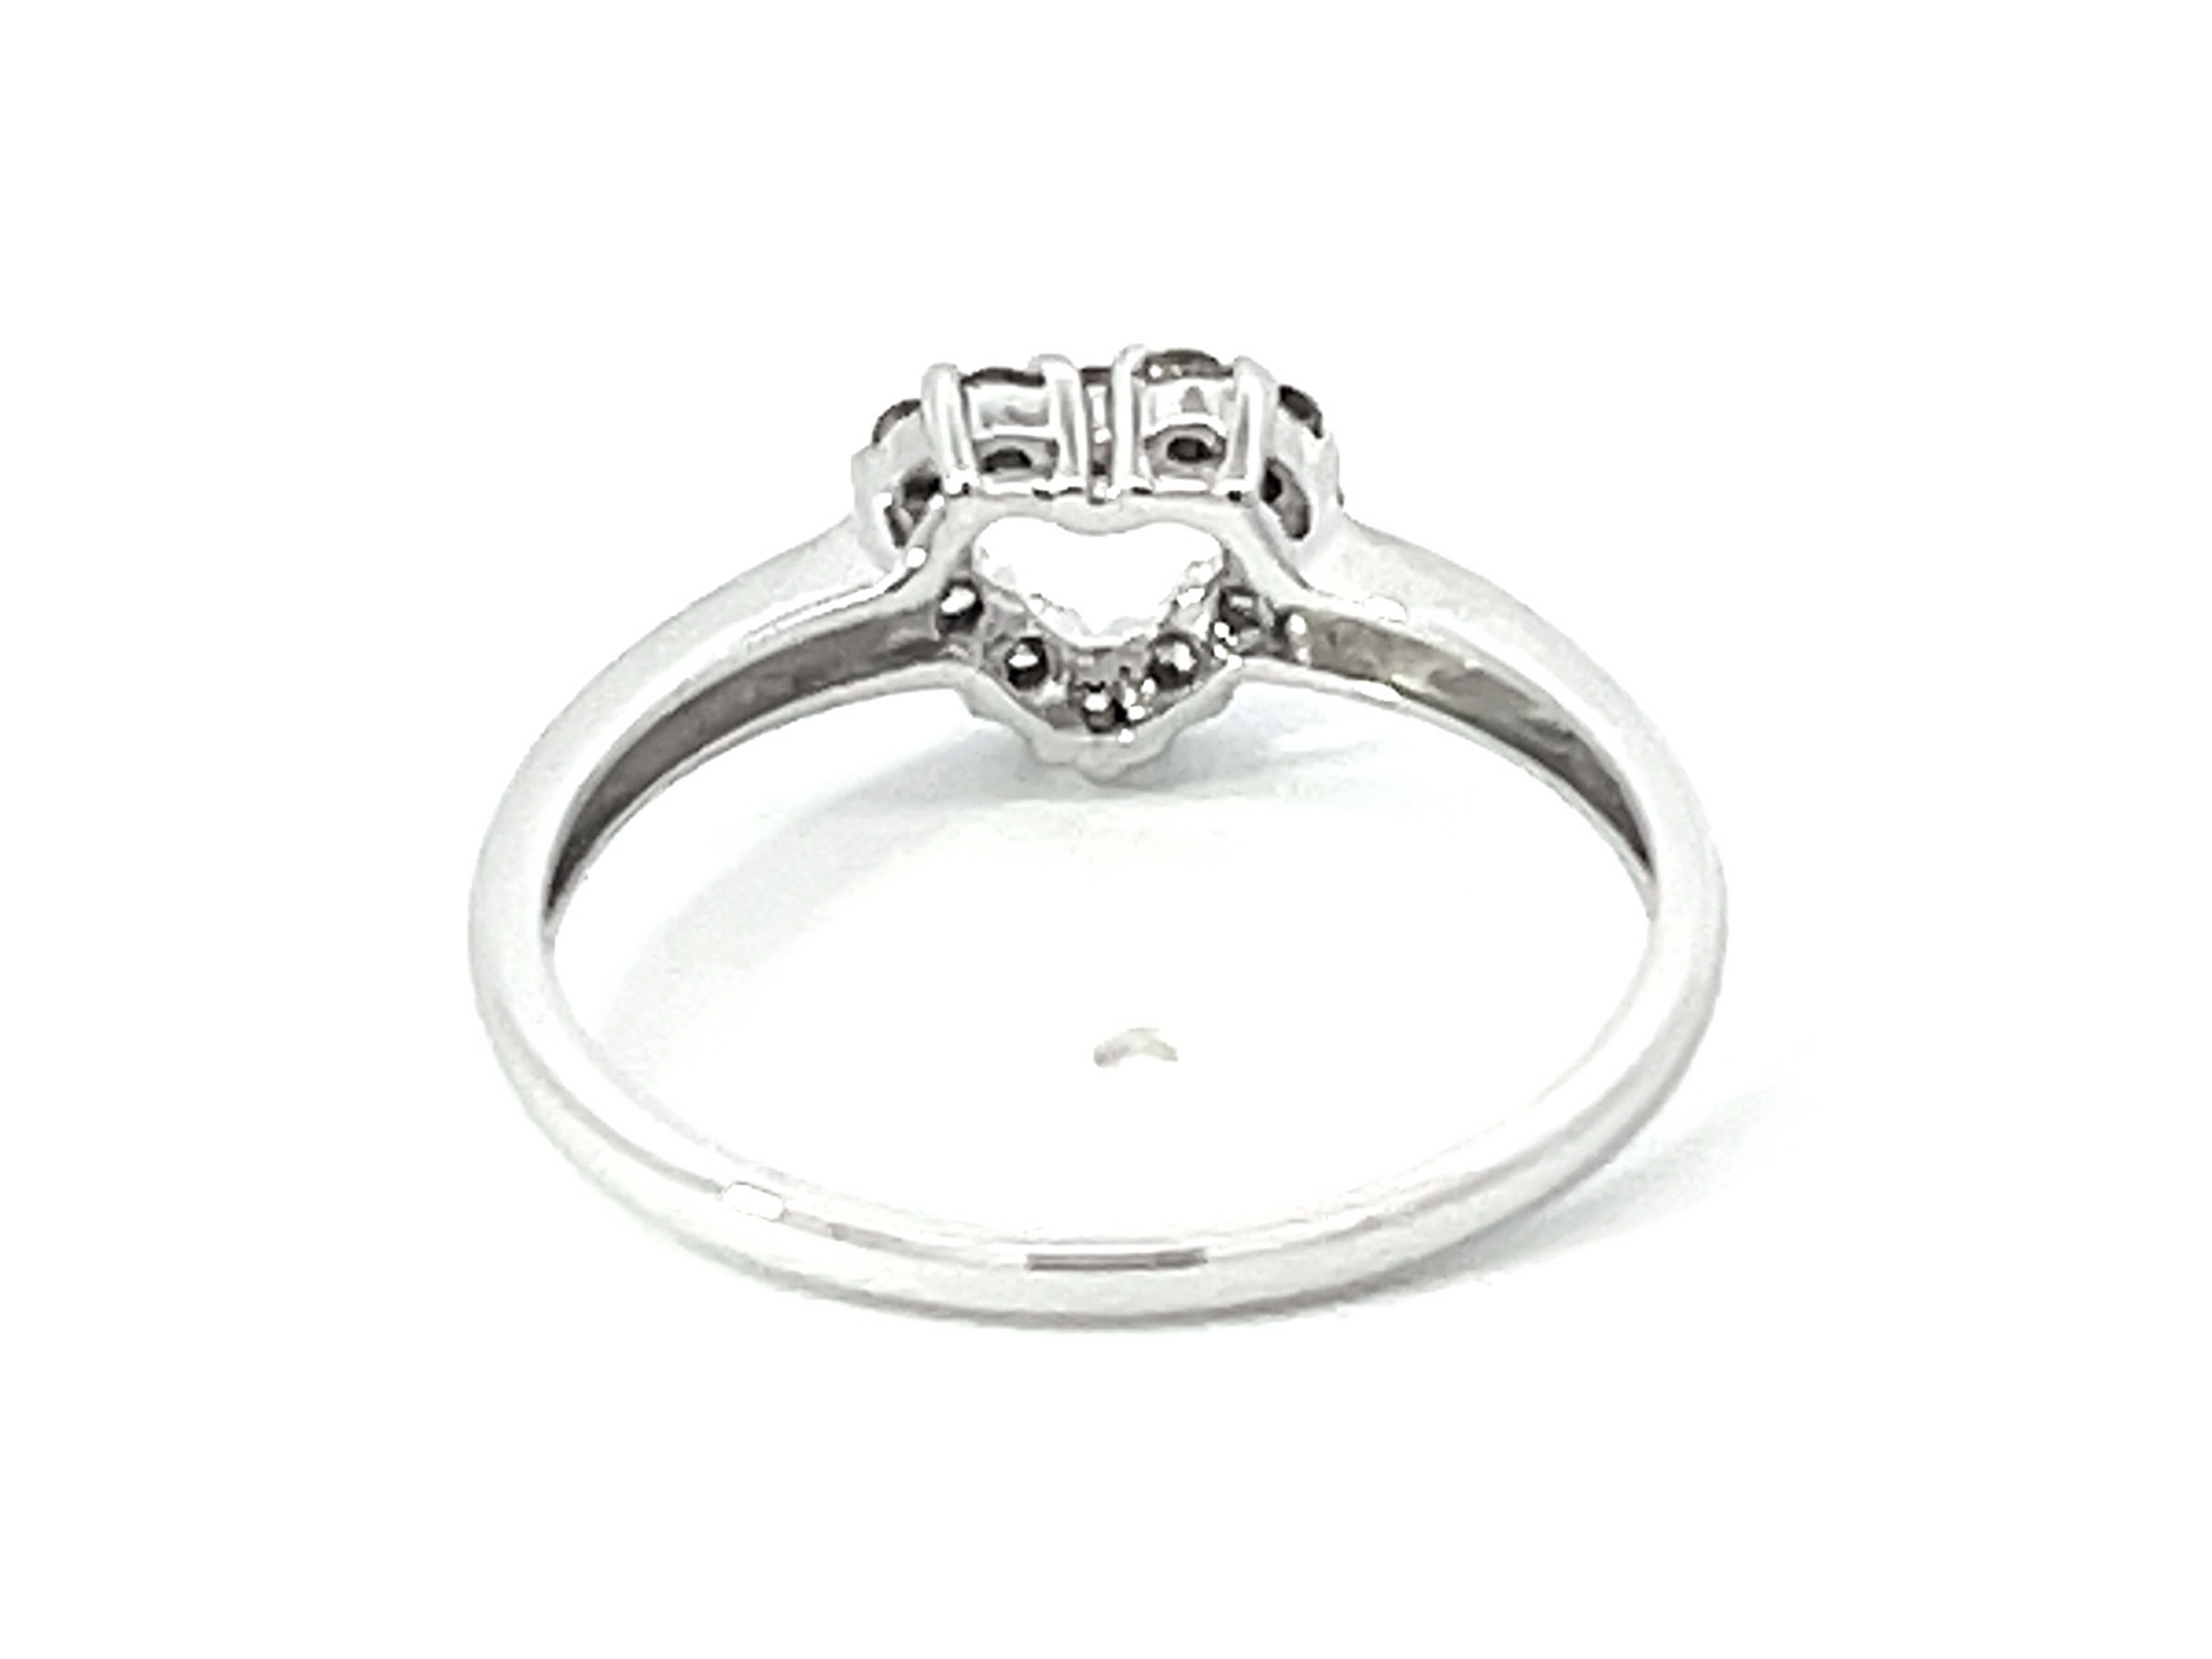 Diamond Heart Ring in 14k White Gold In Excellent Condition For Sale In Honolulu, HI